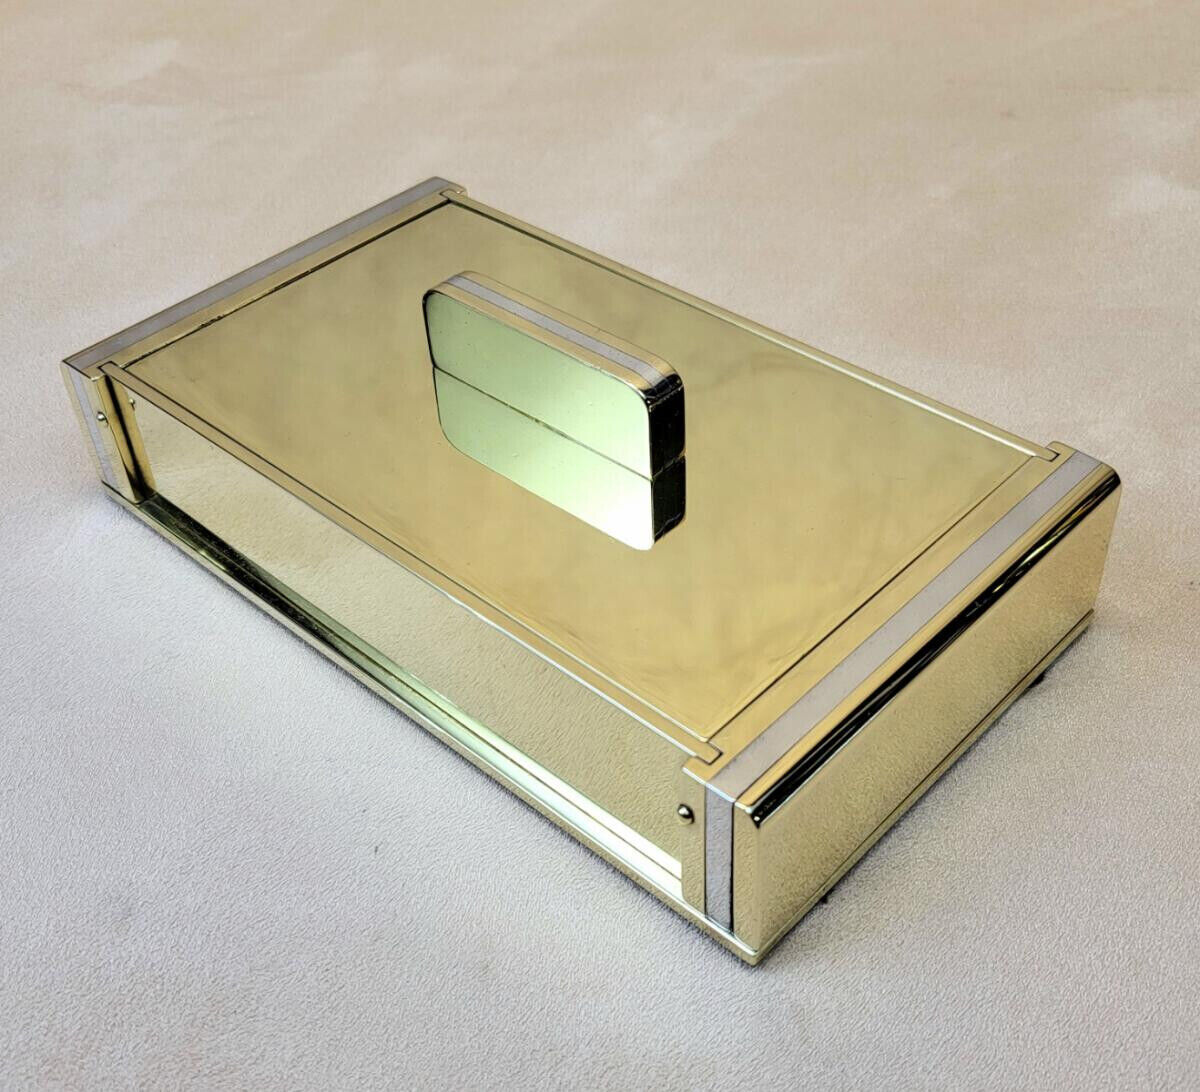 Remarkably Fine MCM Brass & White Metal Box Machinist Precision Crafted 4.1 lbs